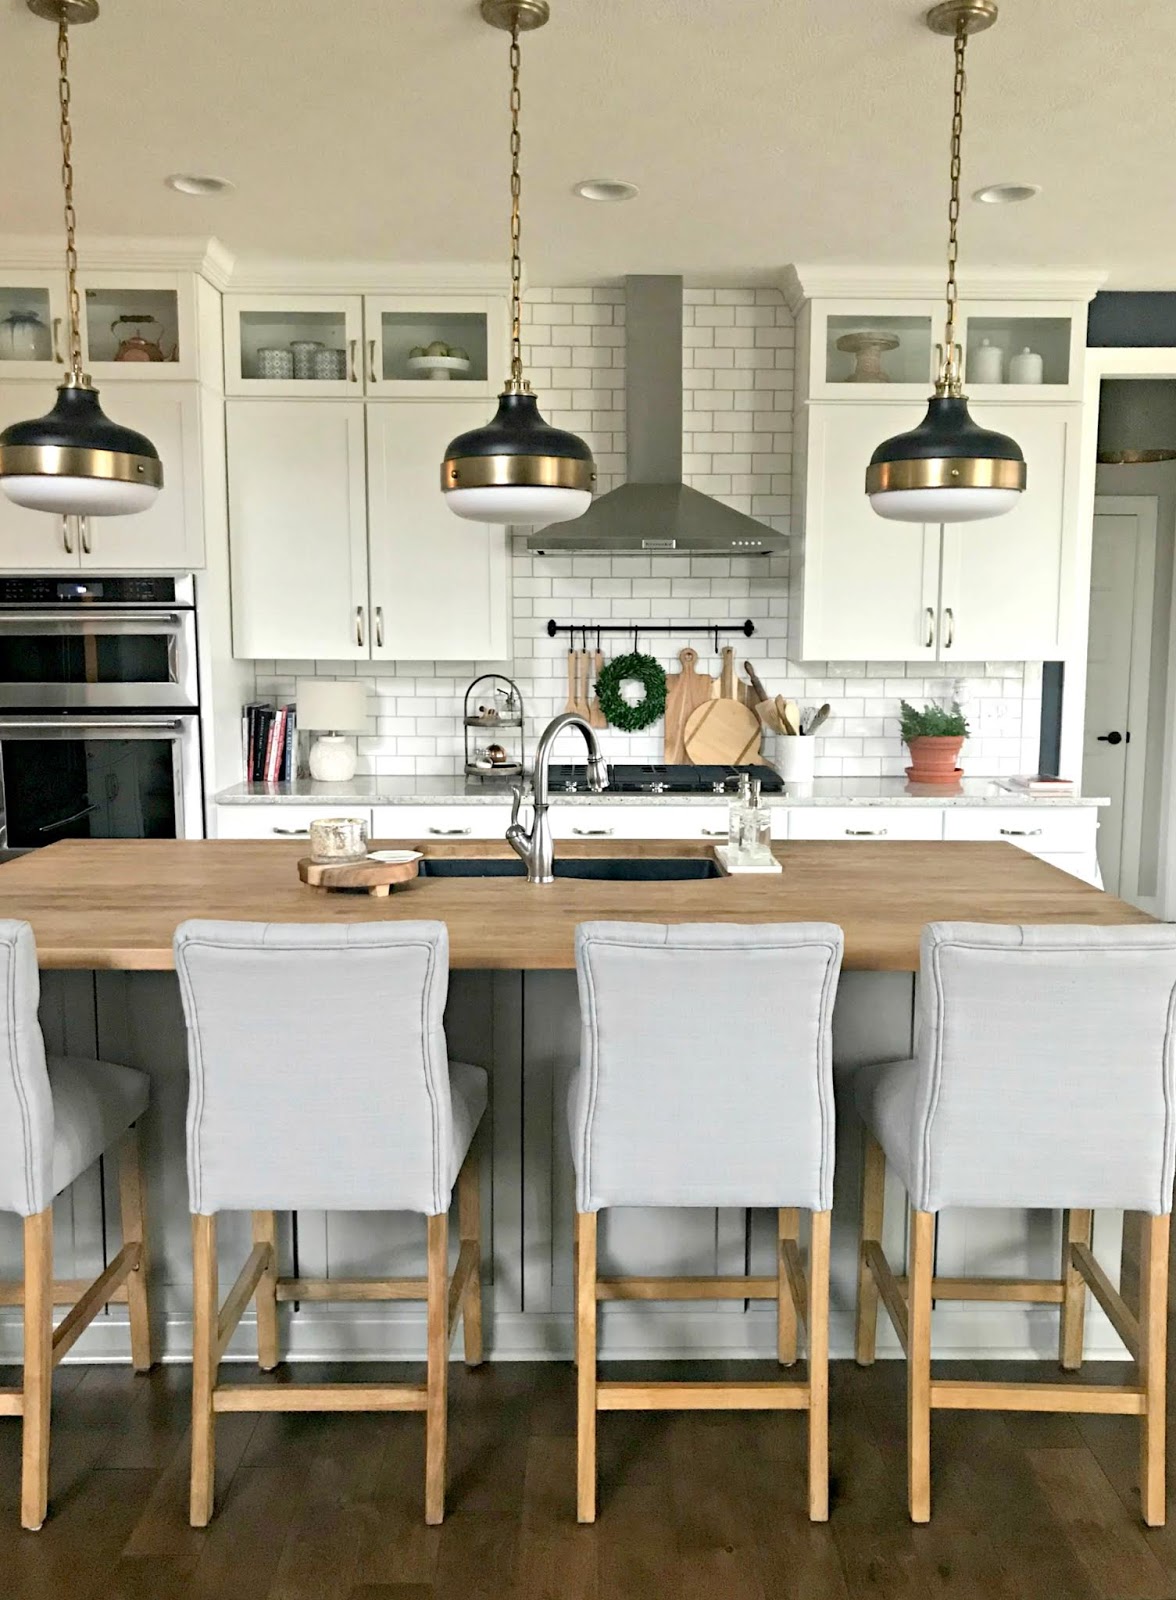 How To Customize A Plain Kitchen Island With Side Panels Thrifty Decor Chick